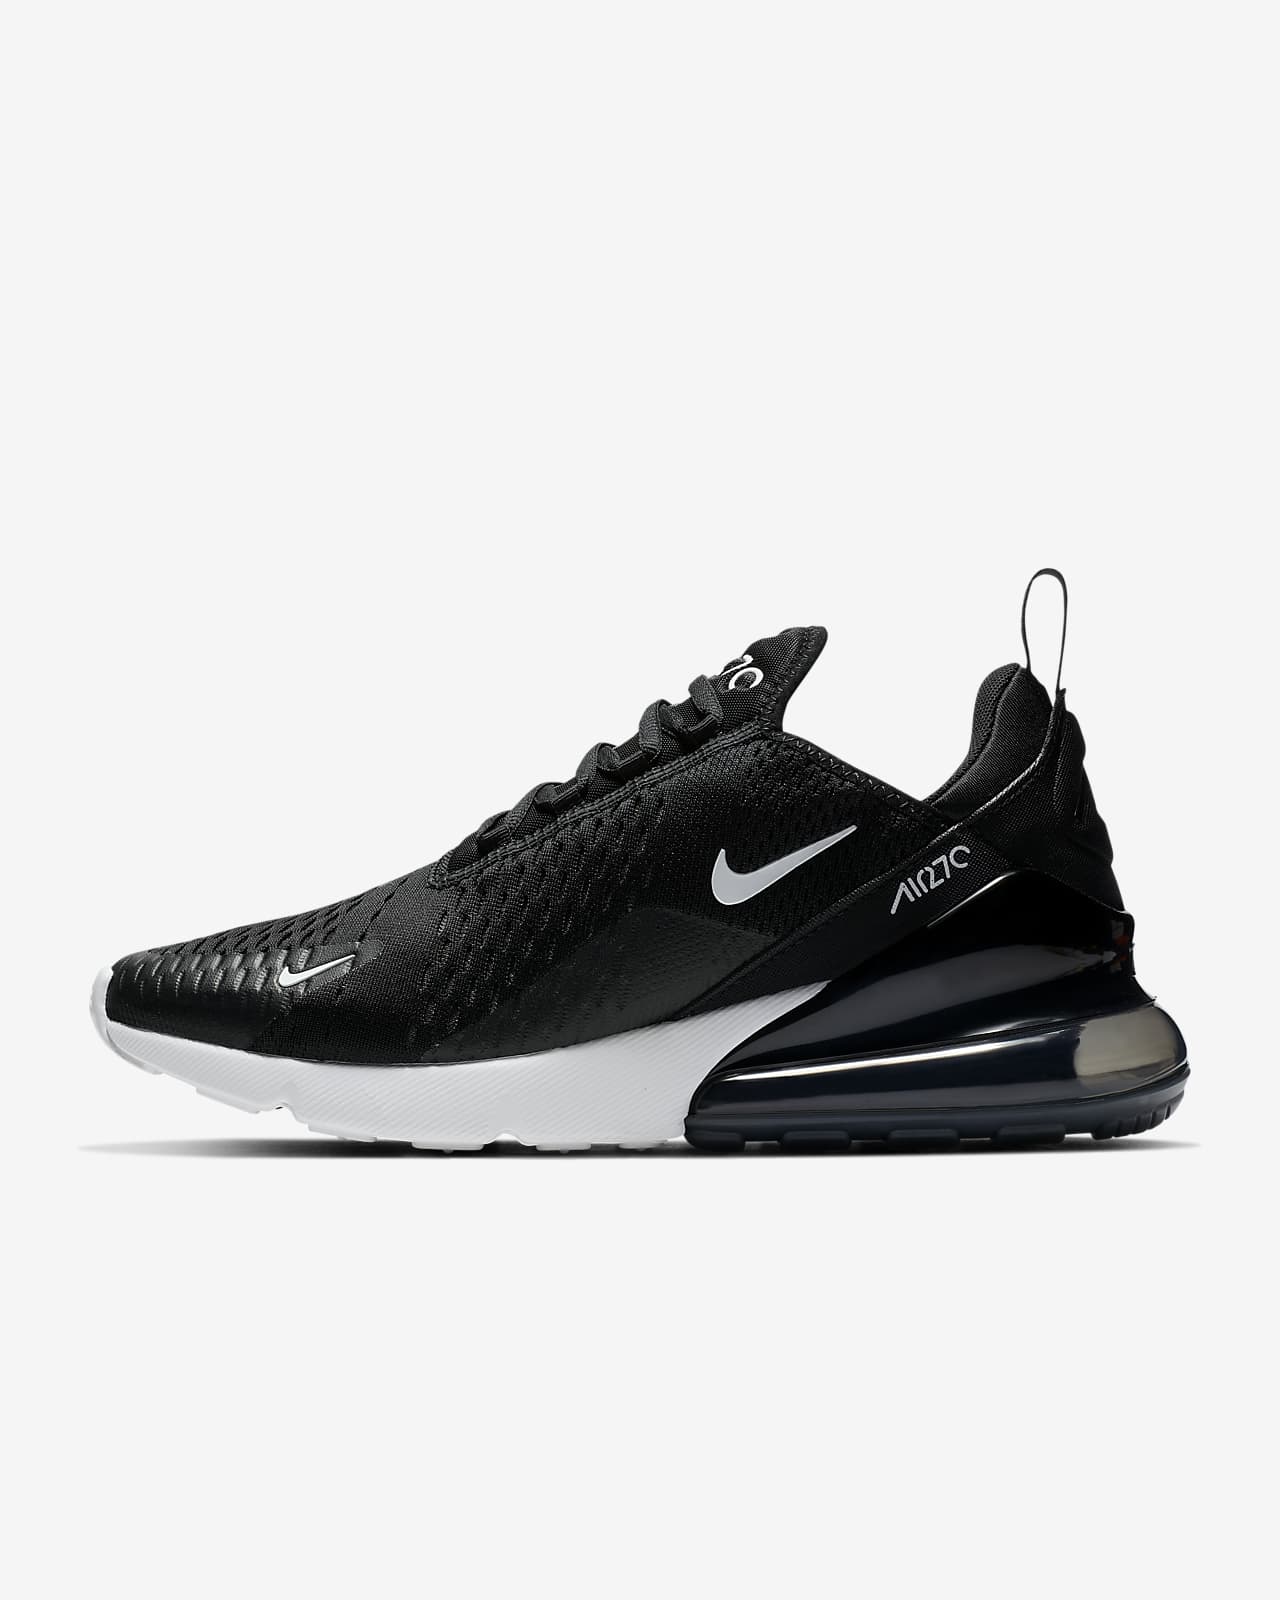 nike shoes black and white air max